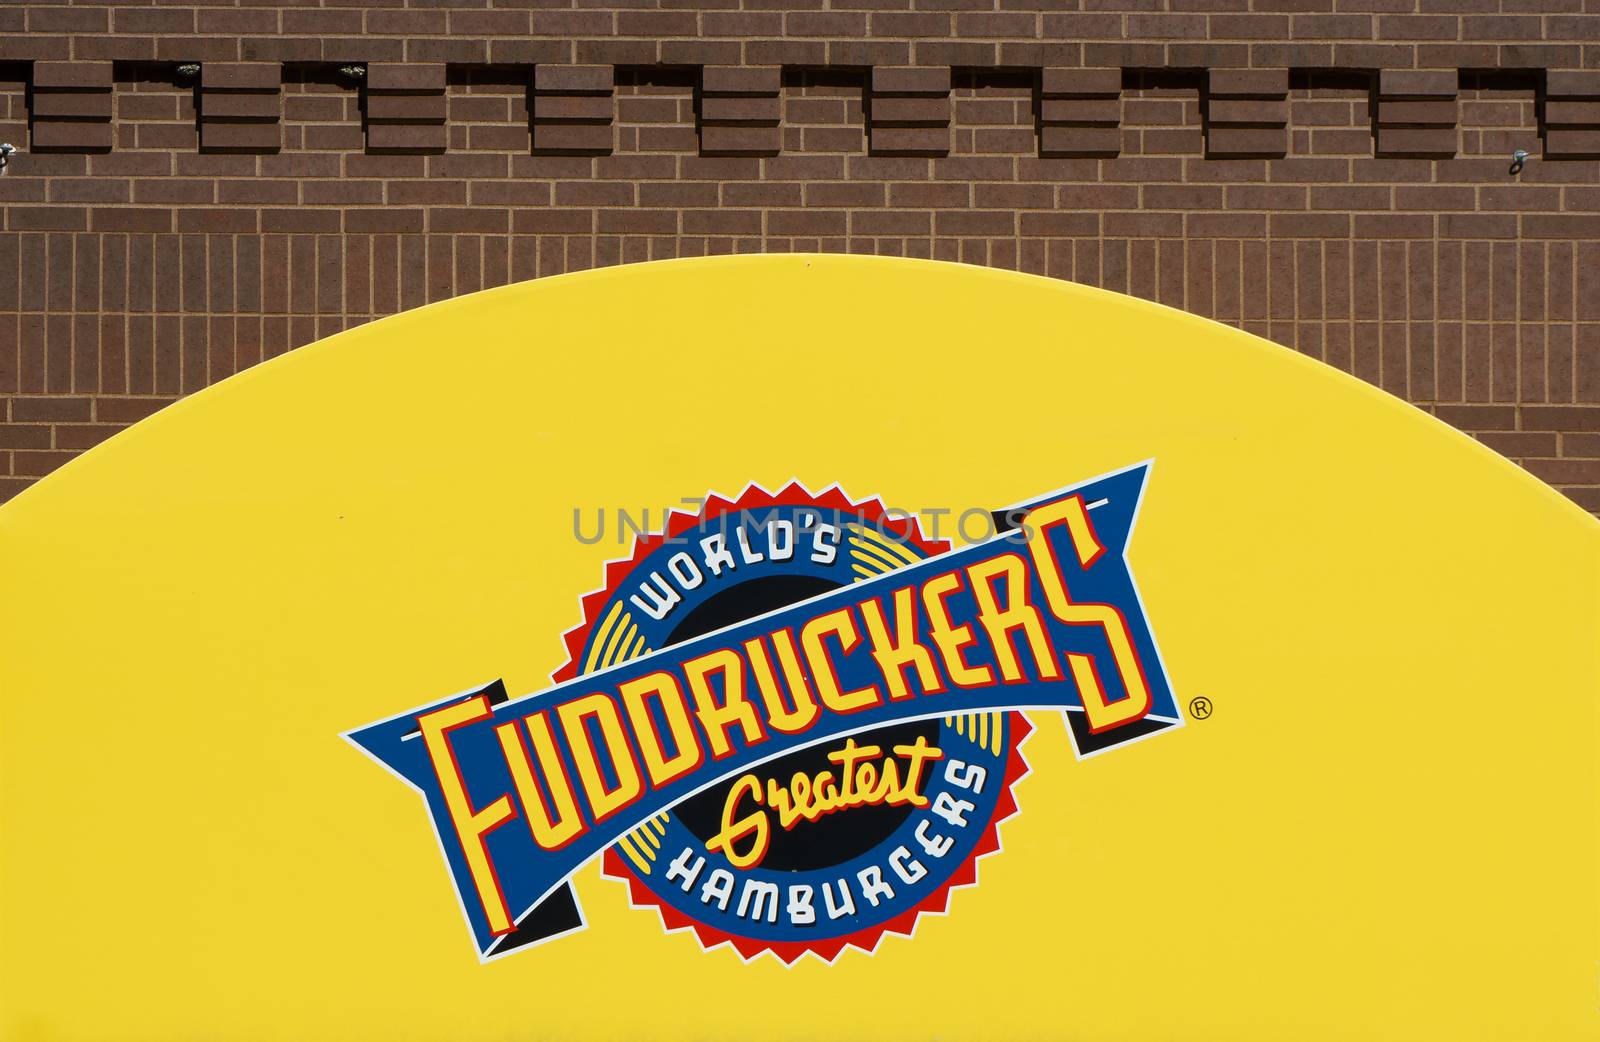 EDINA, MN/USA - AUGUST 11, 2015: Fuddruckers restuarant exterior and sign. Fuddruckers is an American fast casual, franchised restaurant chain that specializes in hamburgers.